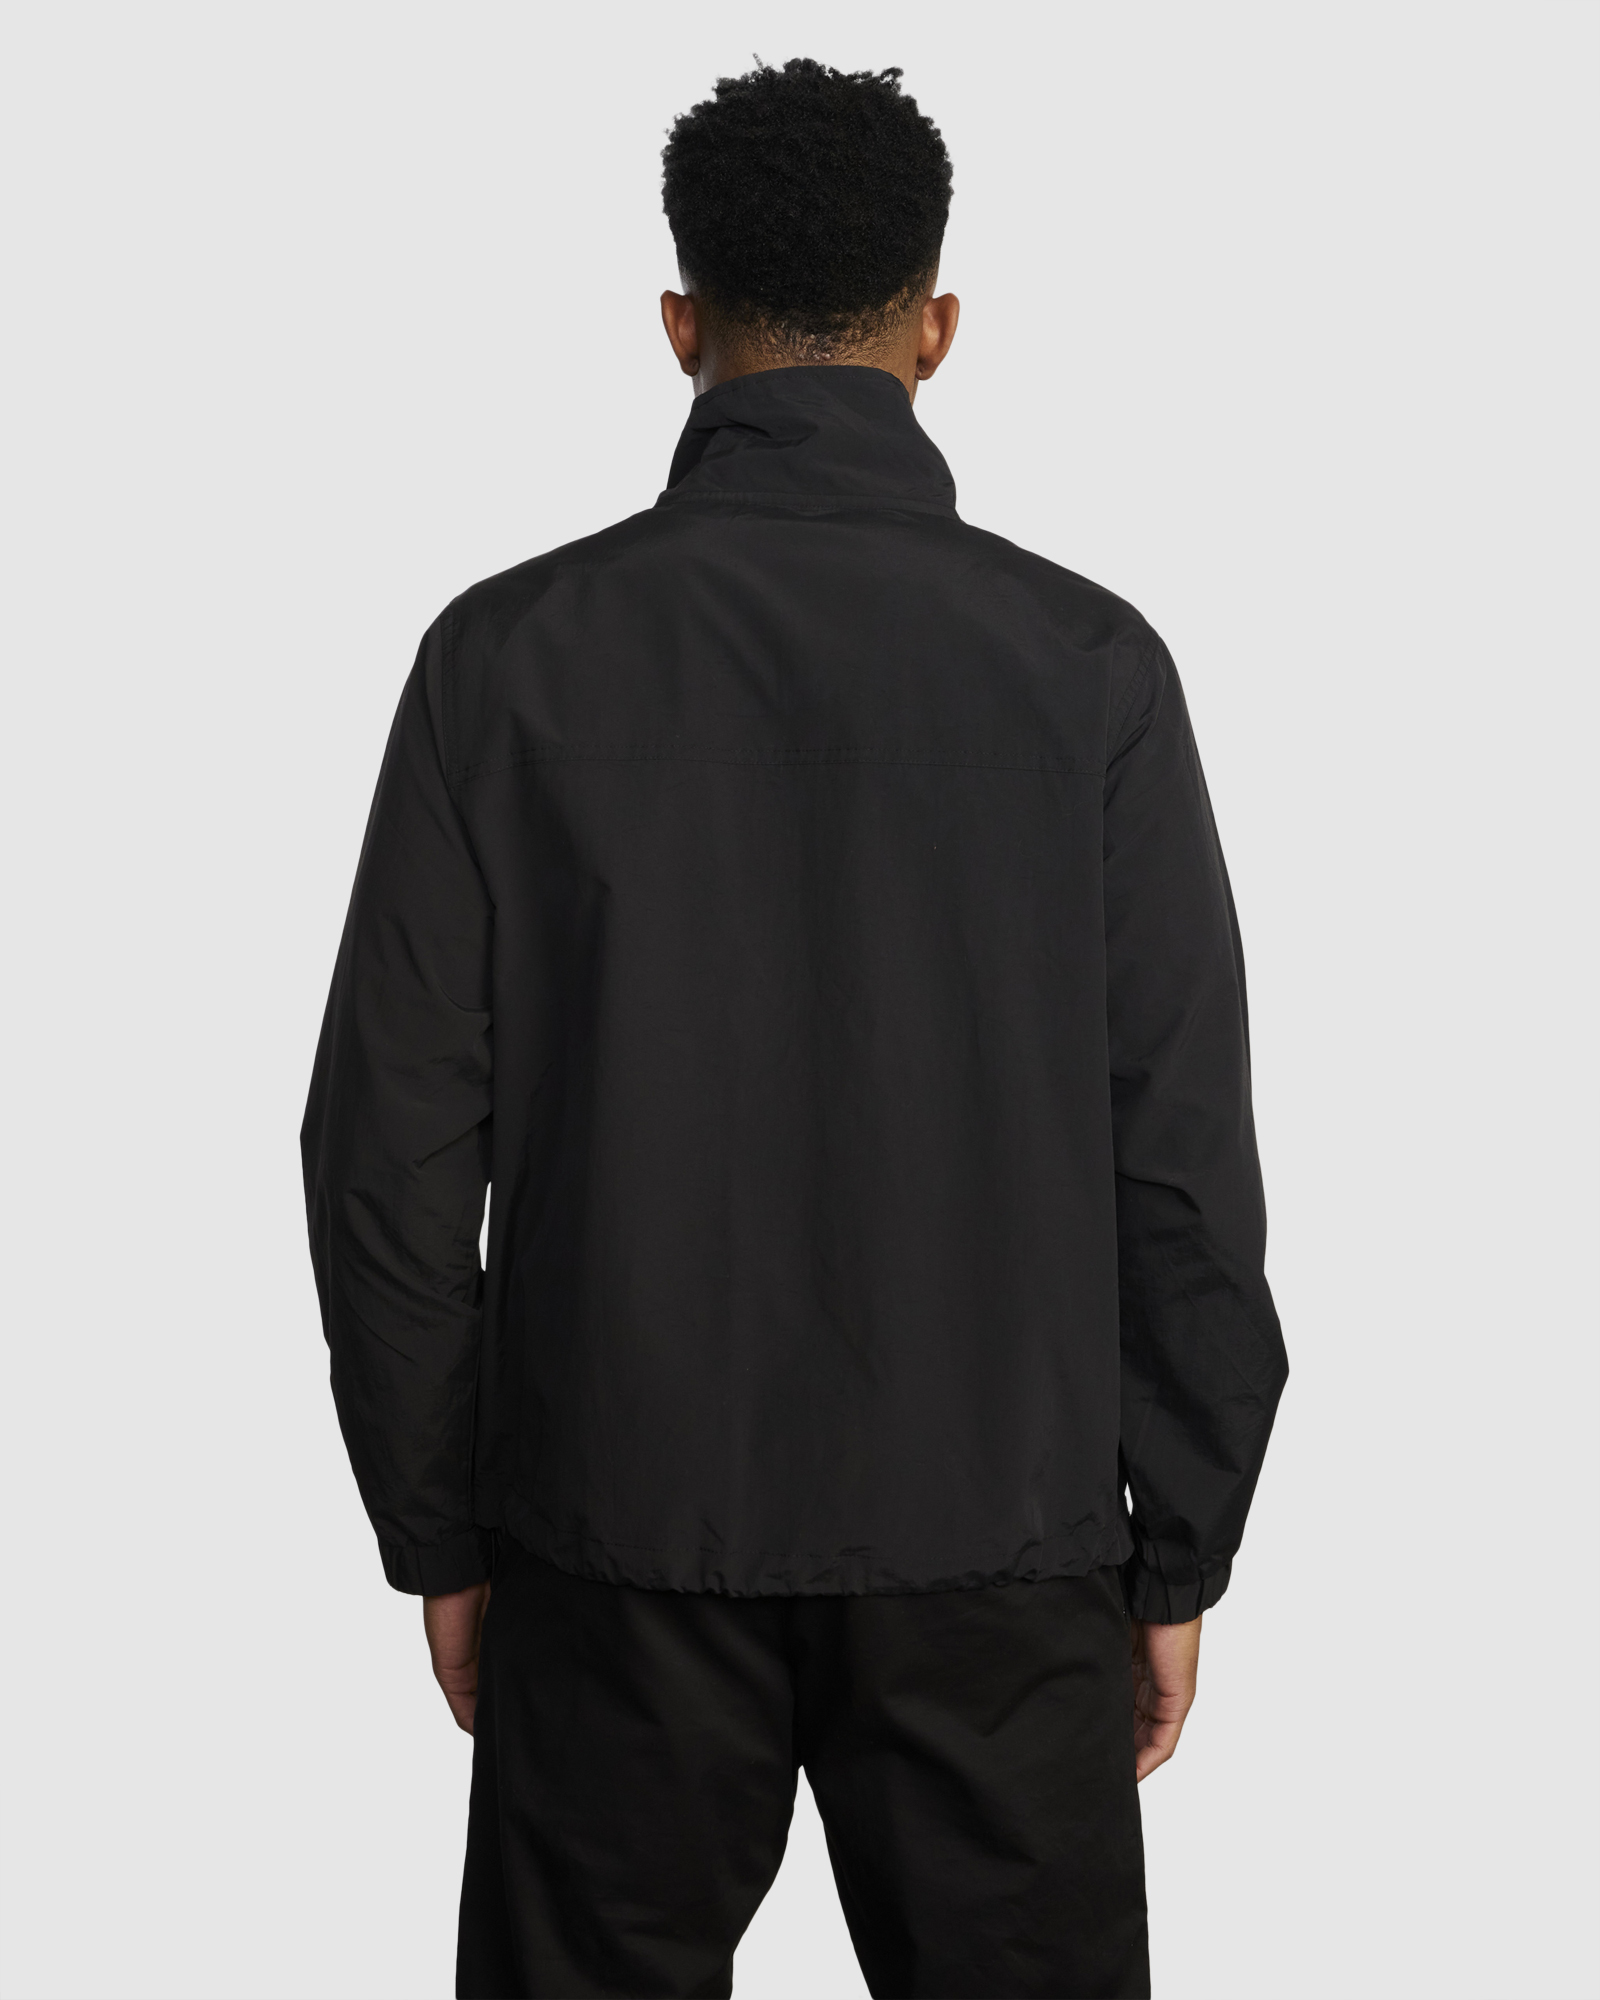 Rvca Outsider Packable Anorack Jacket - Black | SurfStitch